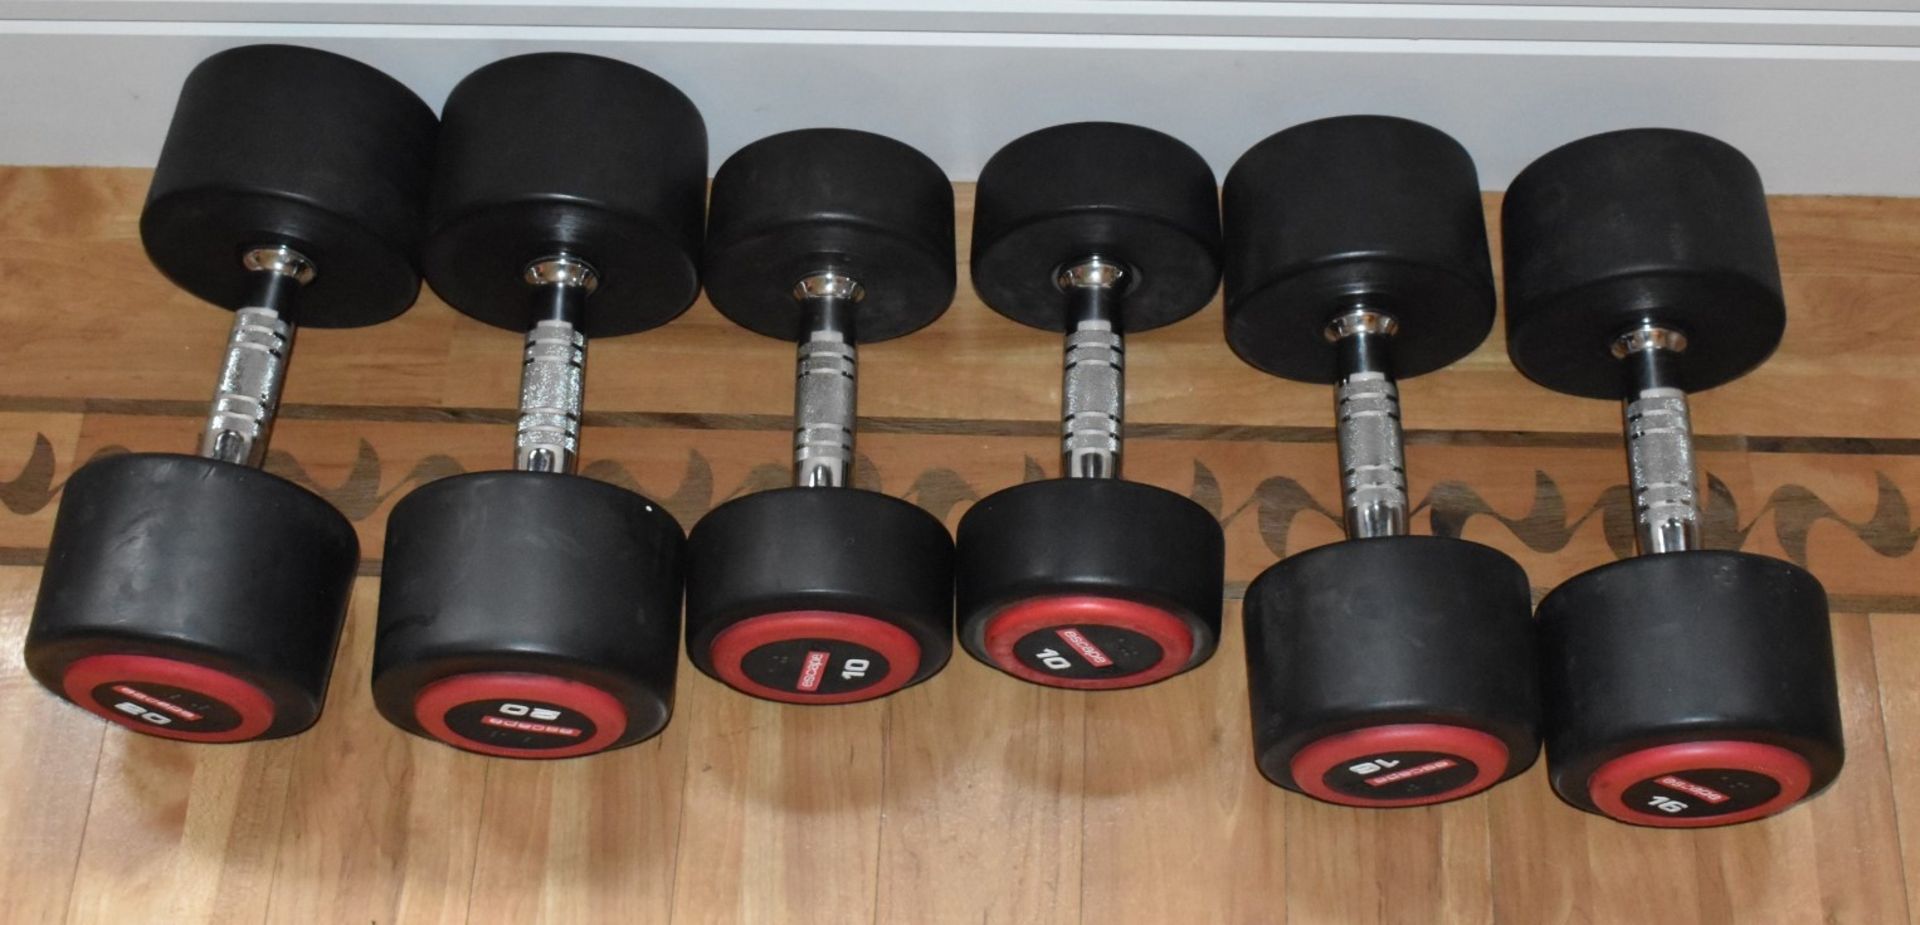 3 x Sets of Escape Polyurethane Dumbell Weights - Includes Pairs of 10kg, 16kg and 20kg Dumbells - 6 - Image 5 of 5